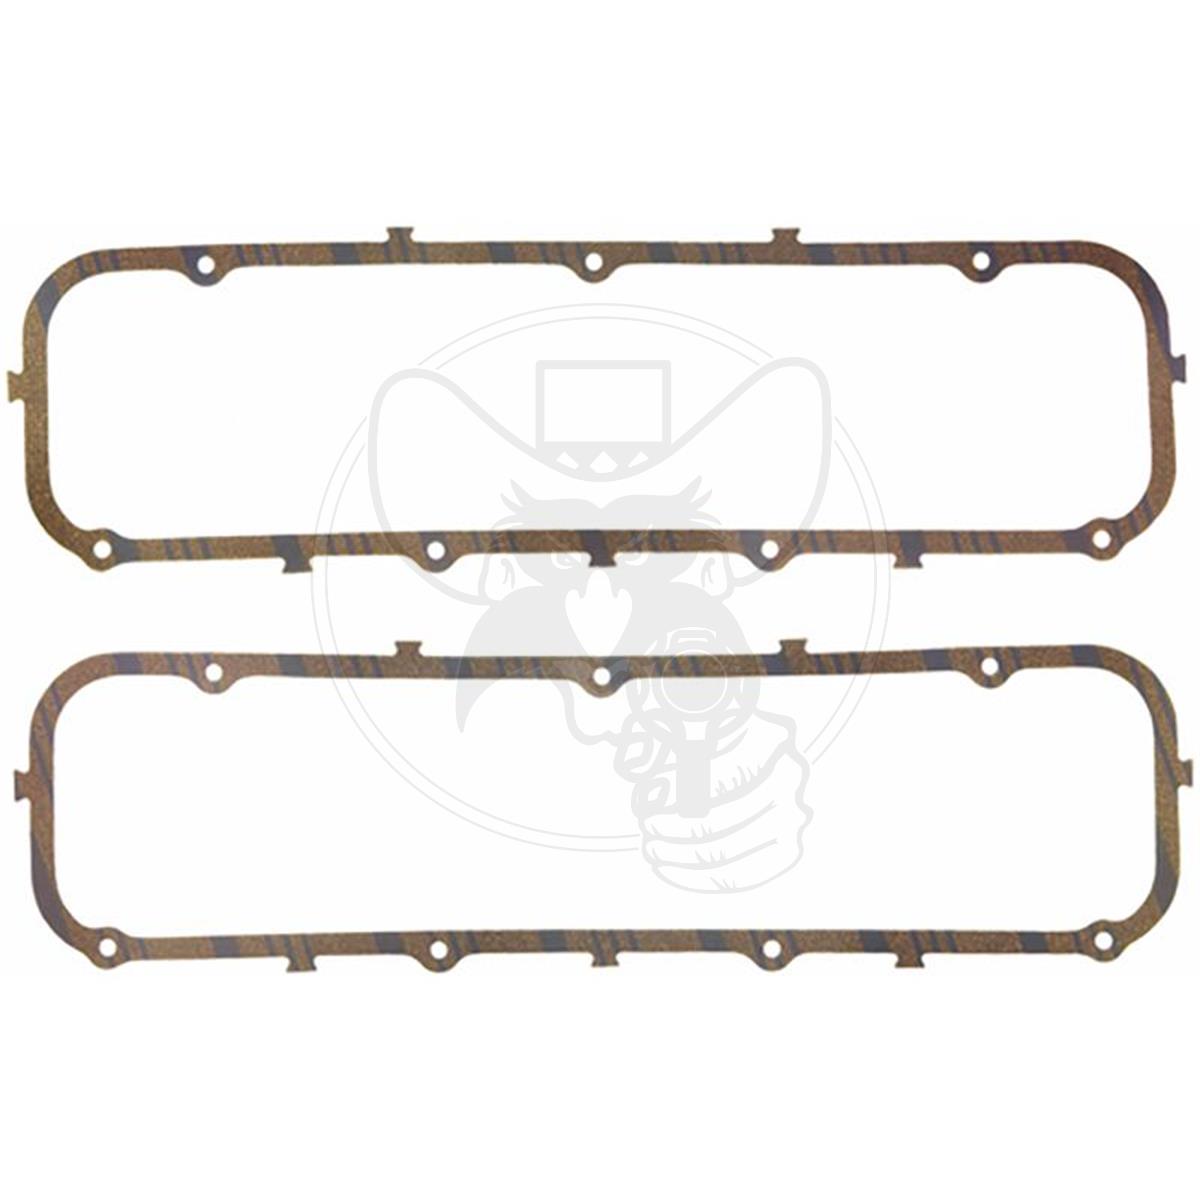 ford 460 valve cover gasket